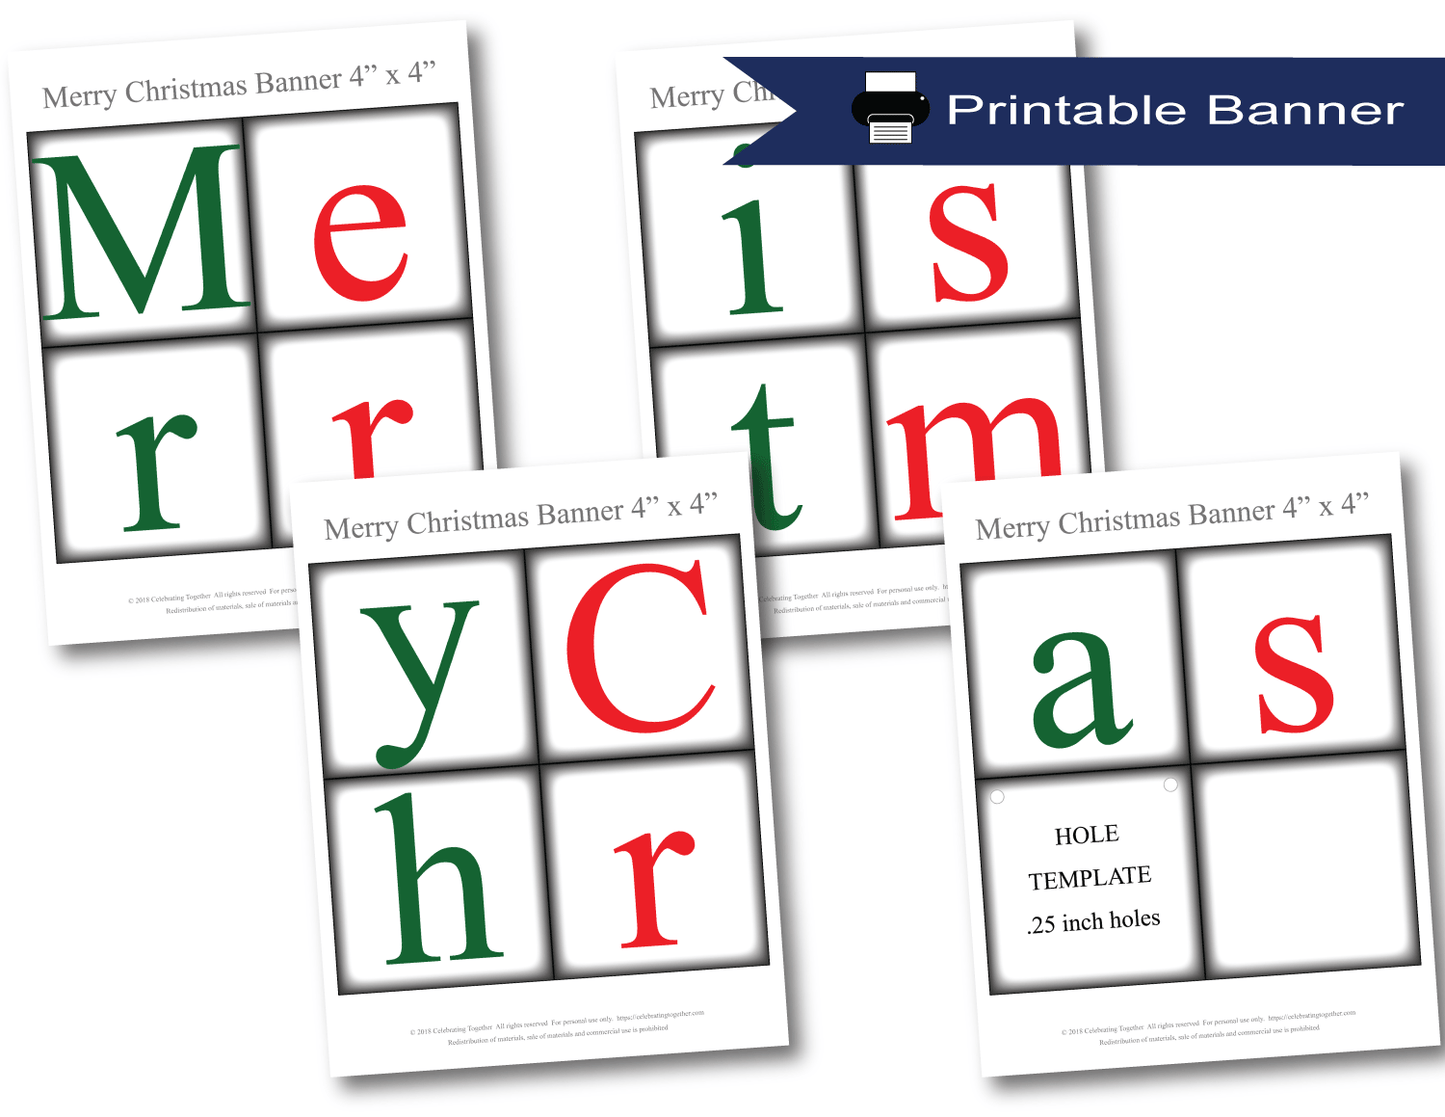 Printable pages for merry christmas banner - diy holiday decor - Celebrating Together